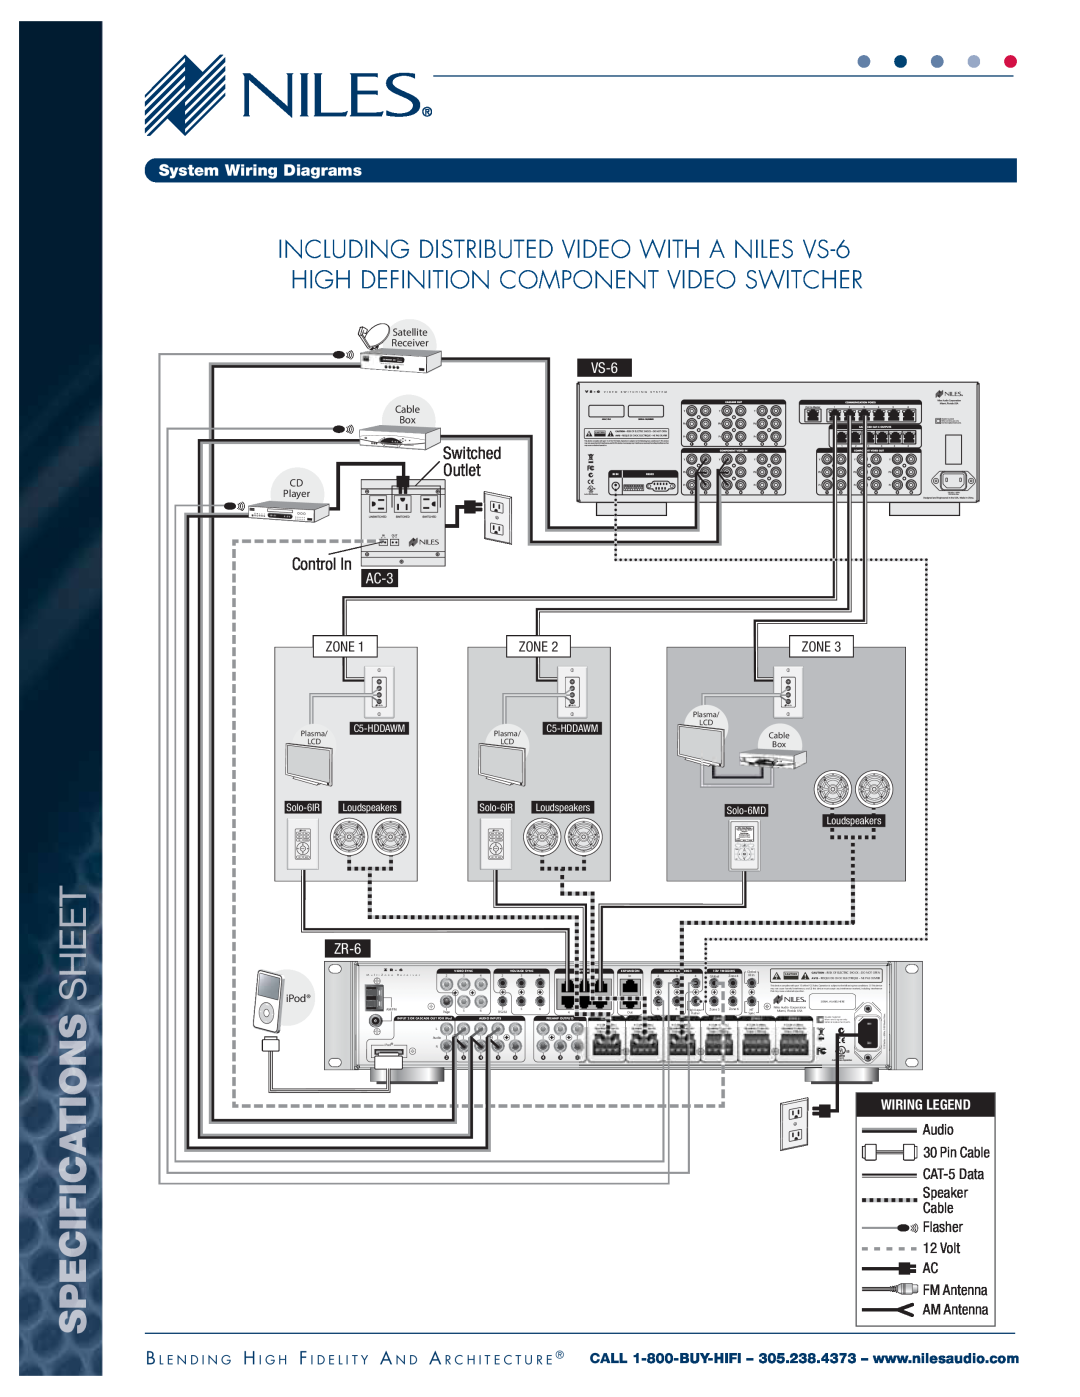 Niles Audio ZR-6 Specifications Sheet, Switched, Outlet, Control In, System Wiring Diagrams, VS-6, AC-3, Zone, C5-HDDAWM 